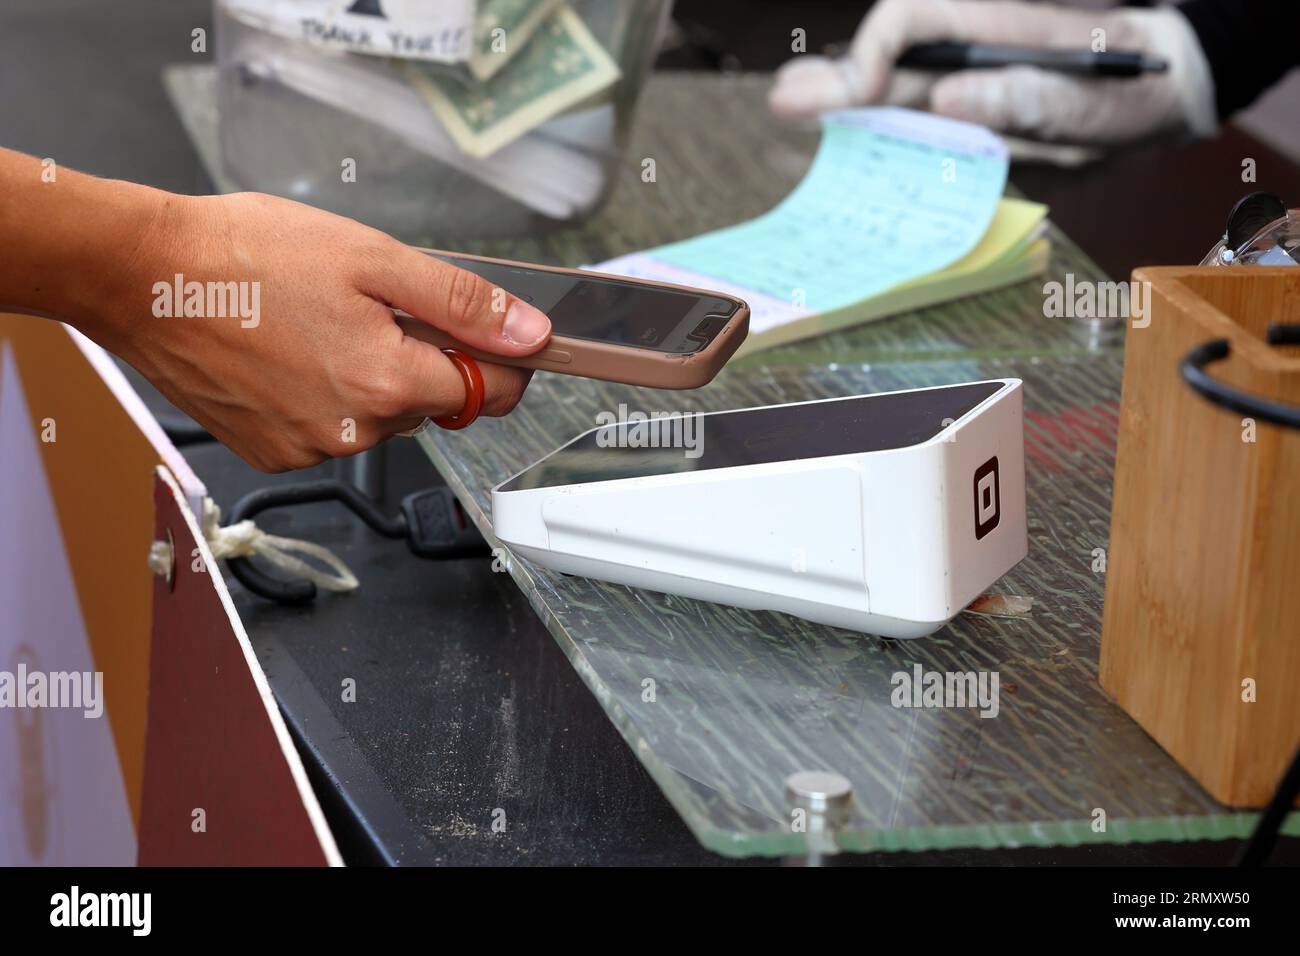 A person holds a smartphone over a wireless Square Terminal point of sales device to transact a NFC mobile payment, or contactless digital payment. Stock Photo